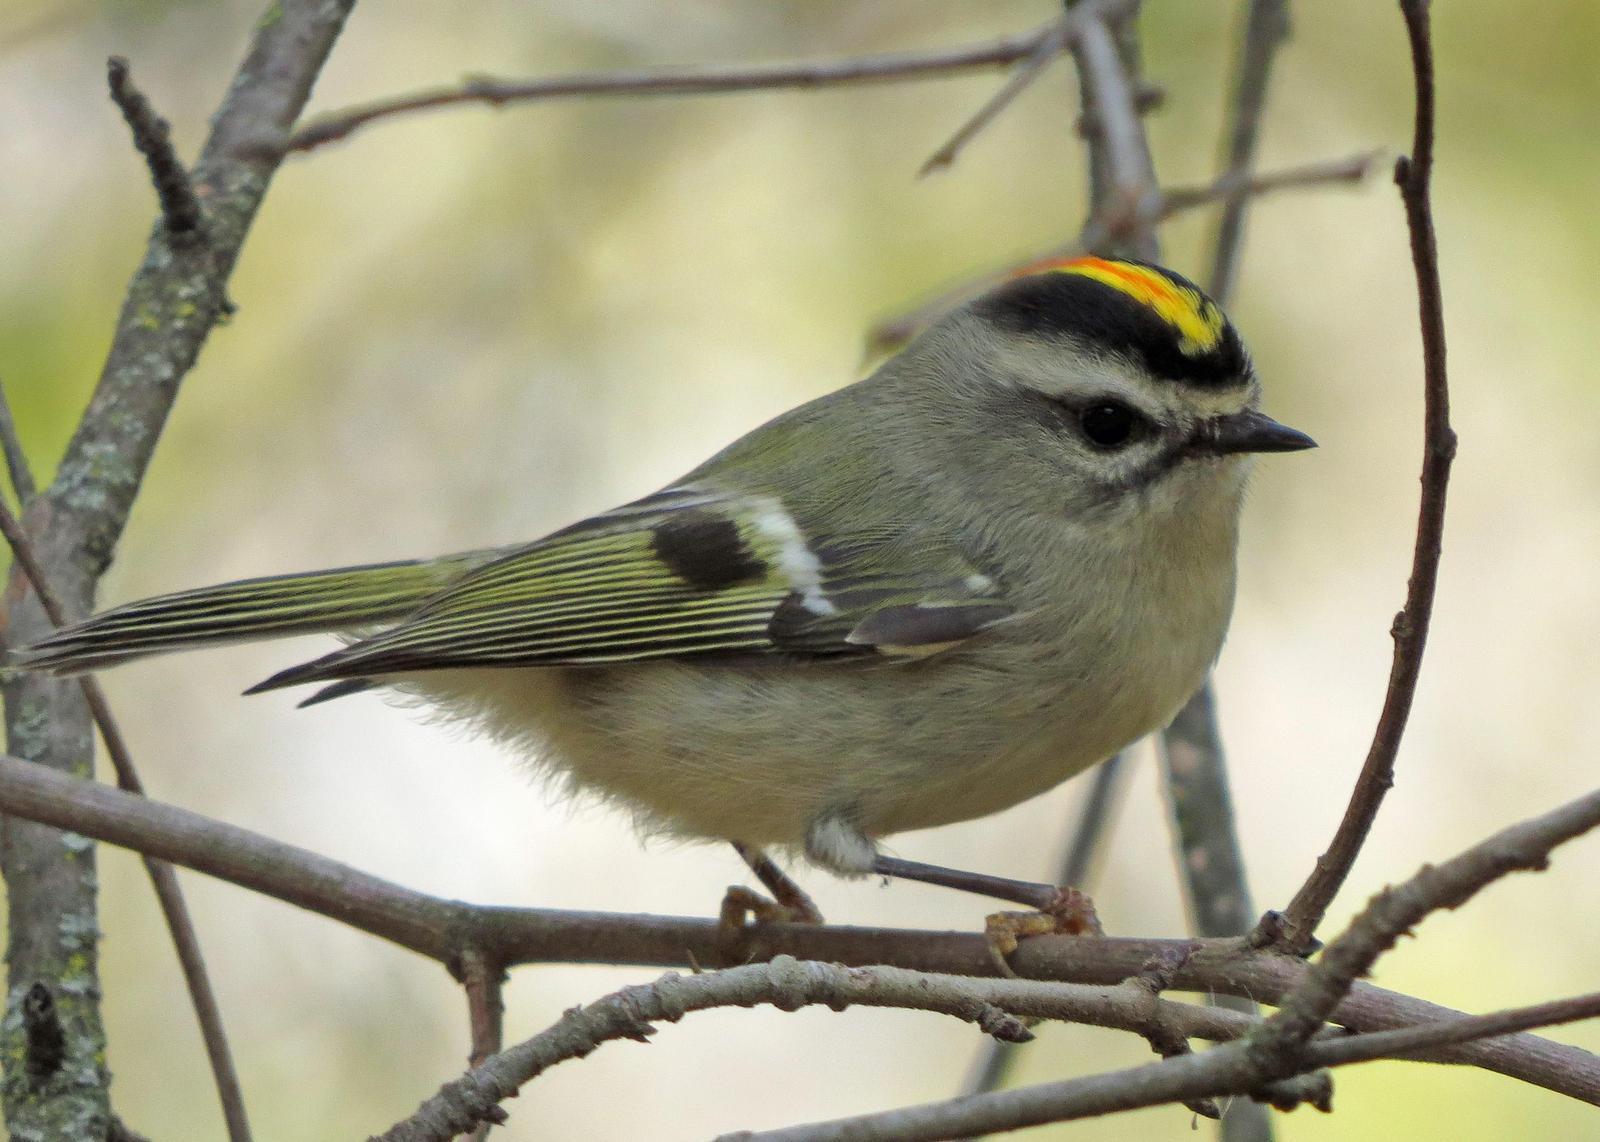 Golden-crowned Kinglet Photo by Kelly Preheim